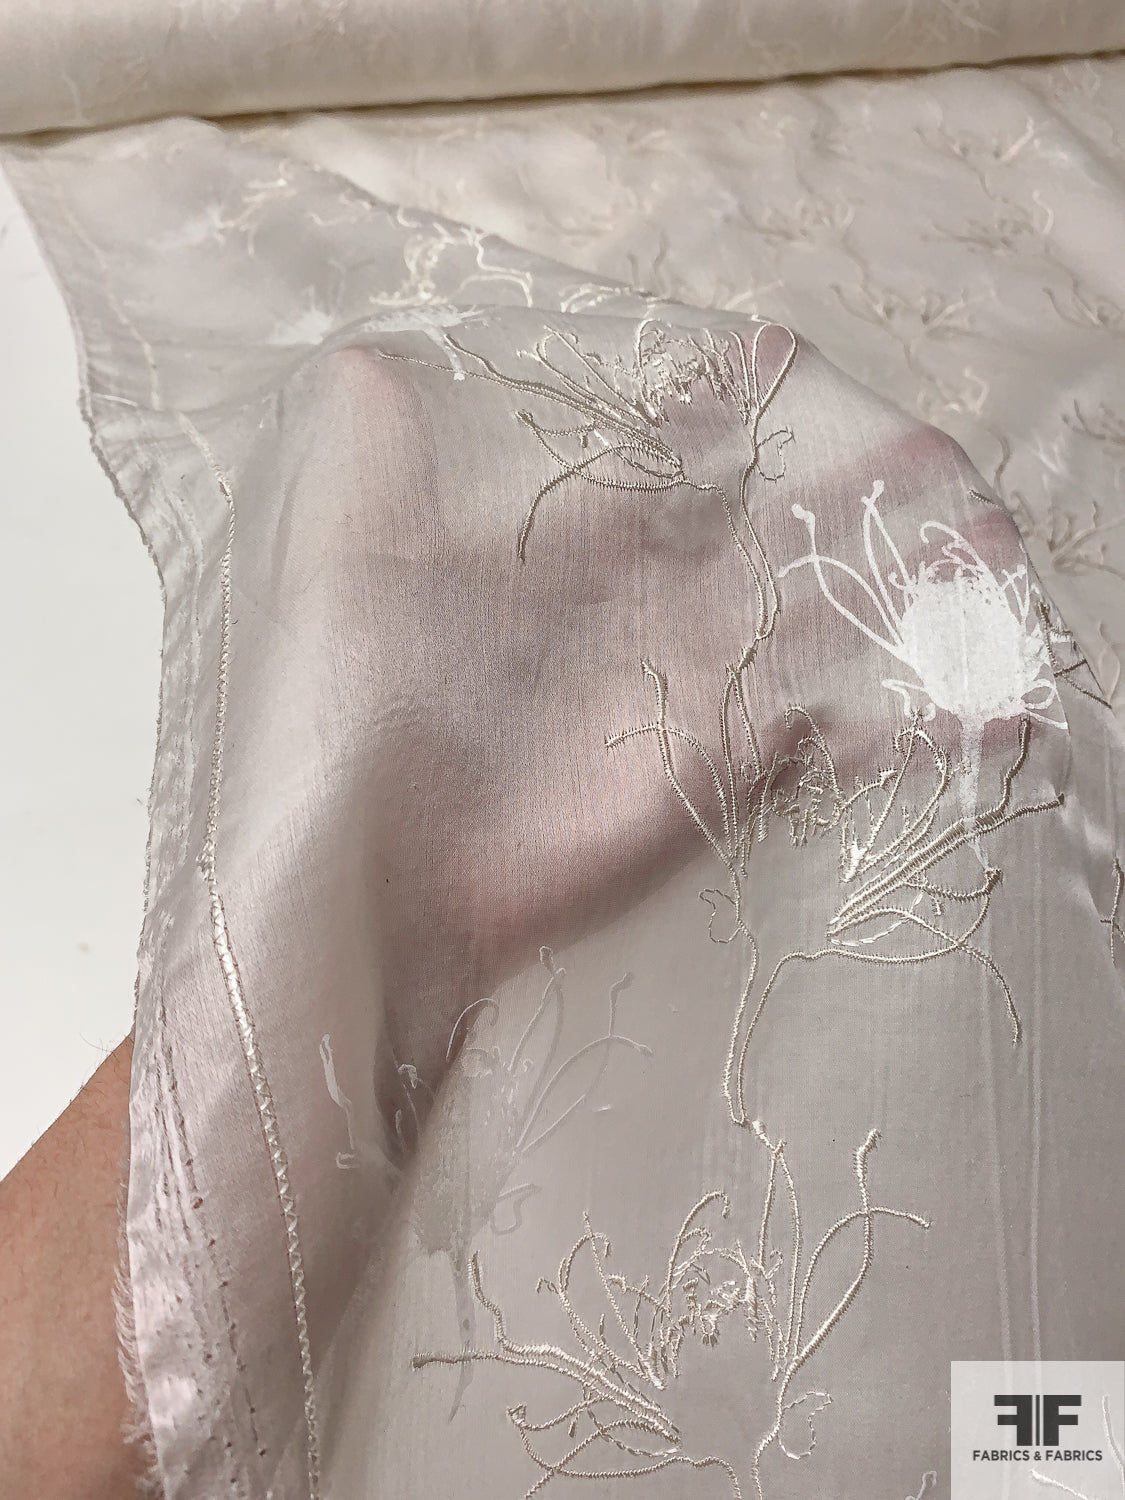 Italian Exotic and Ethereal Satin Face Organza with Floral Embroidery - White / Light Ivory